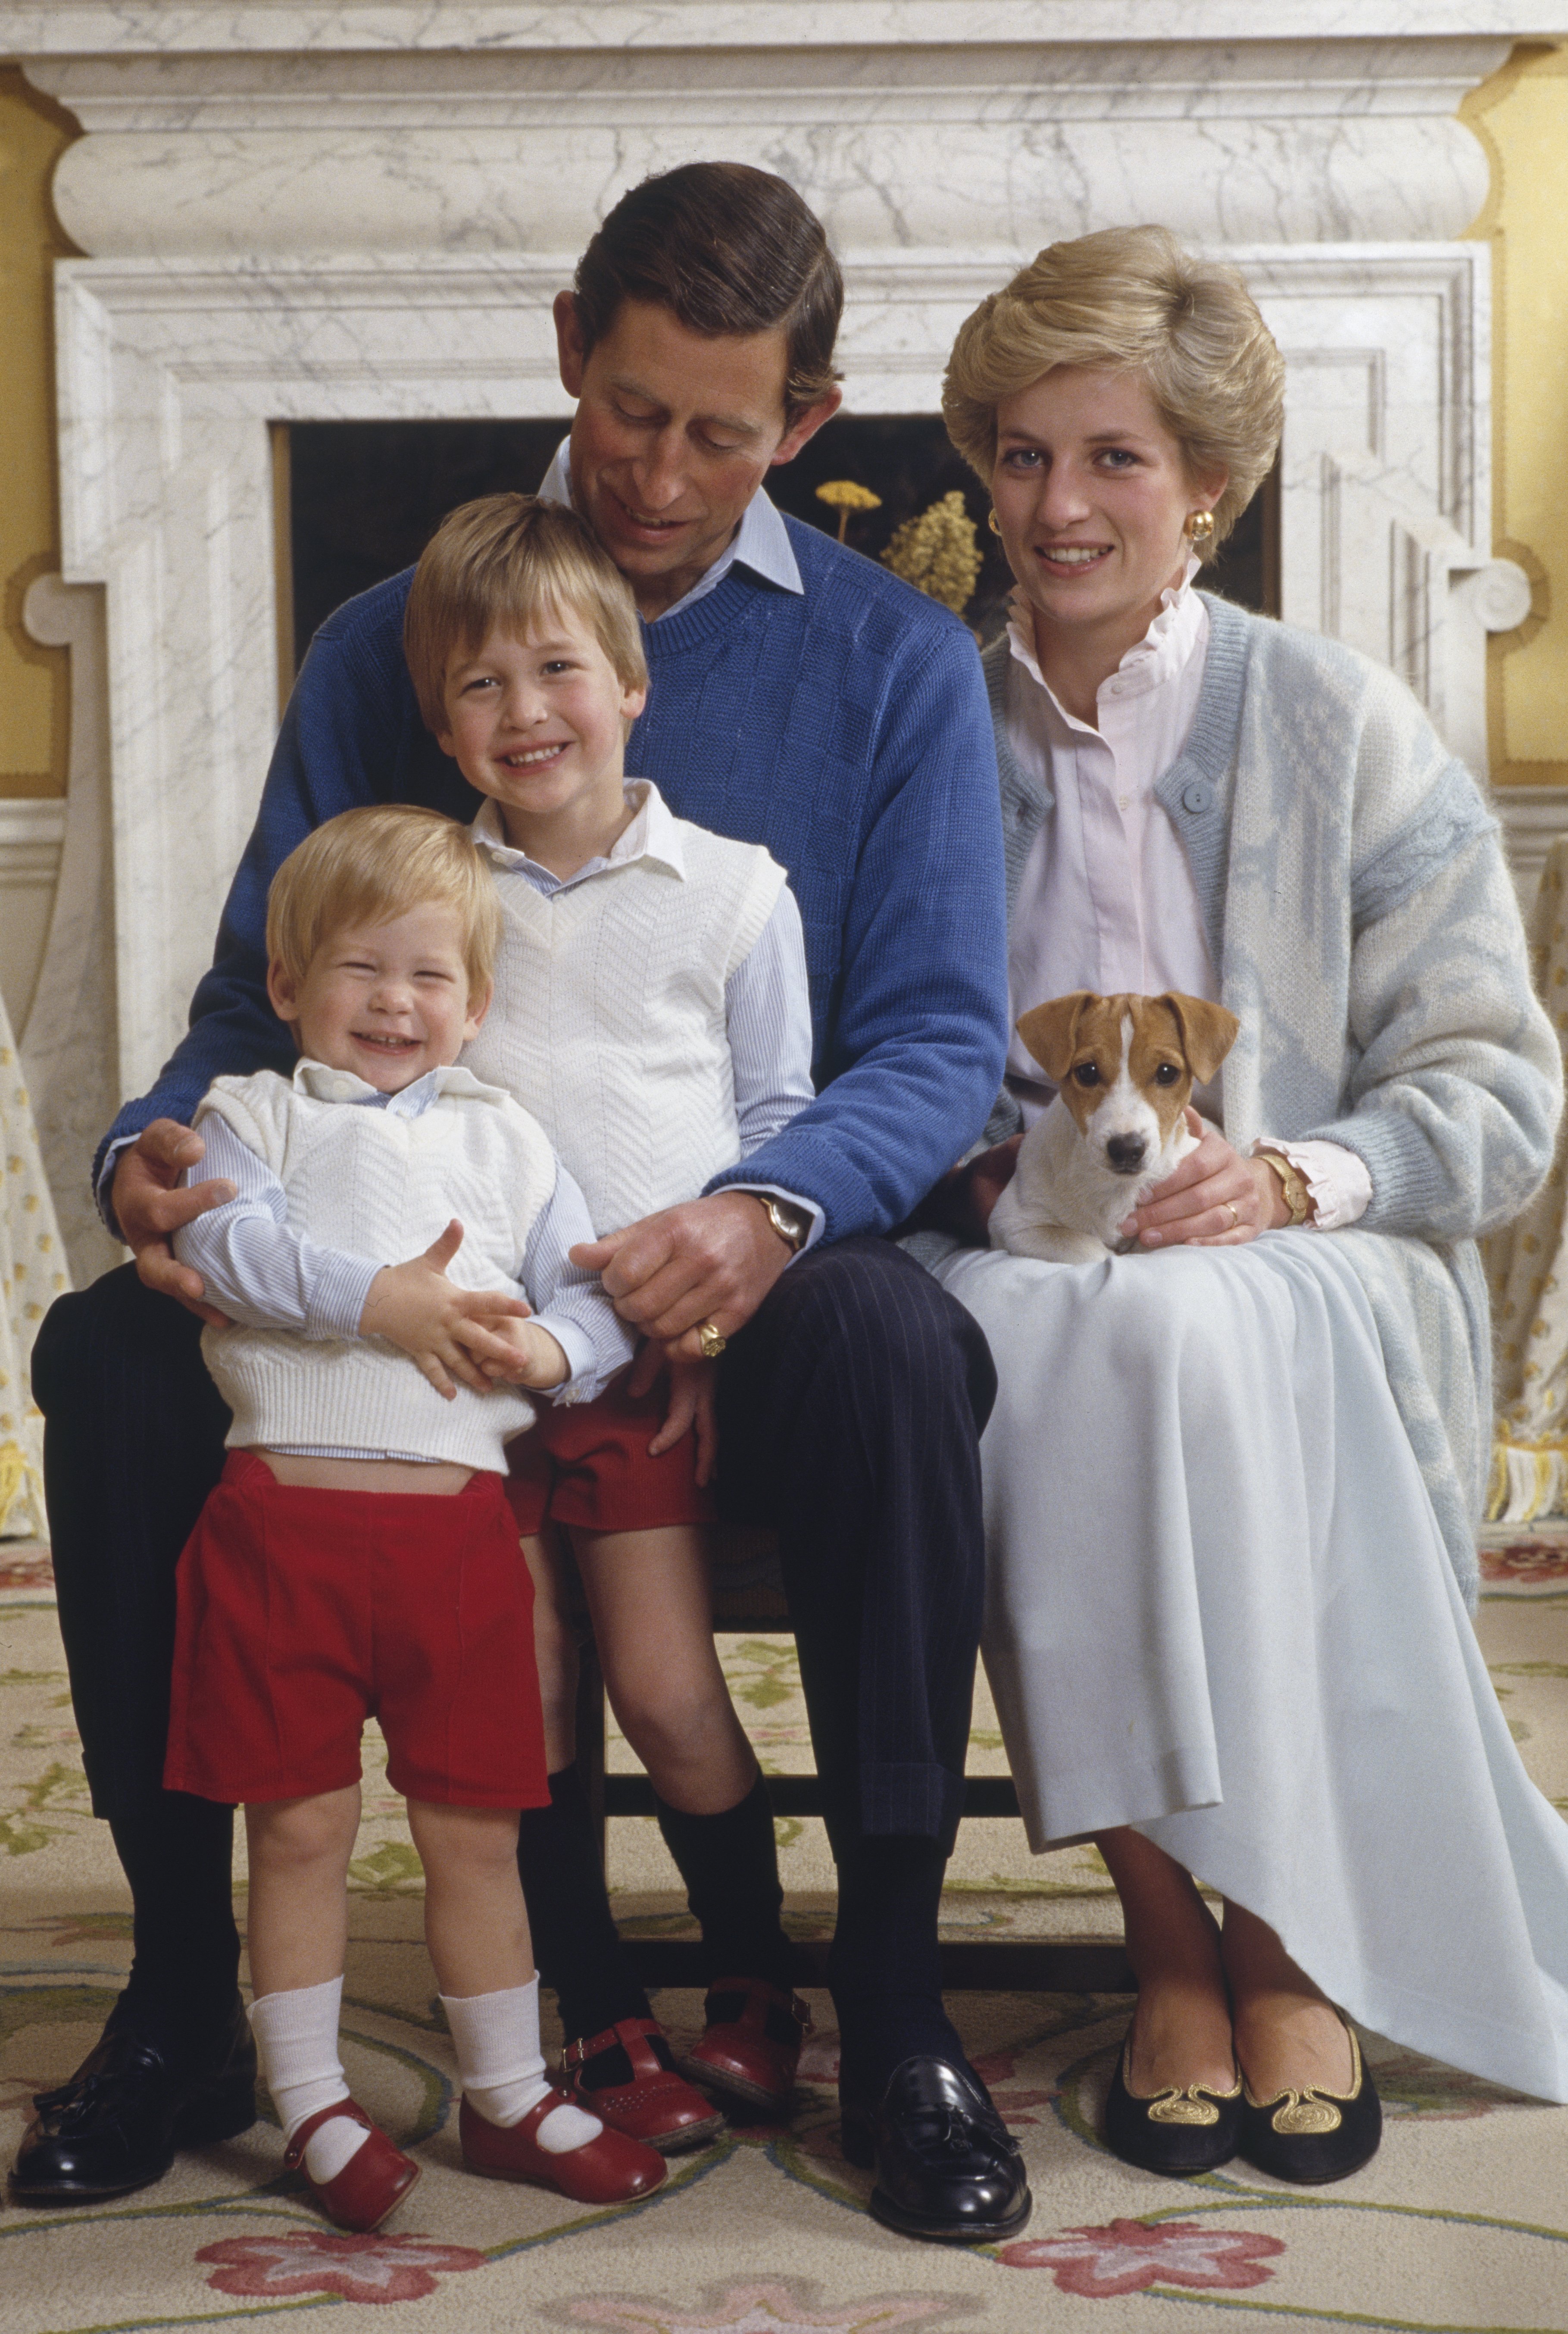 Prince Charles and Princess Diana photographed at home with their sons Prince William and Prince Harry on December 1986, in Kensington Palace, London / Source: Getty Images